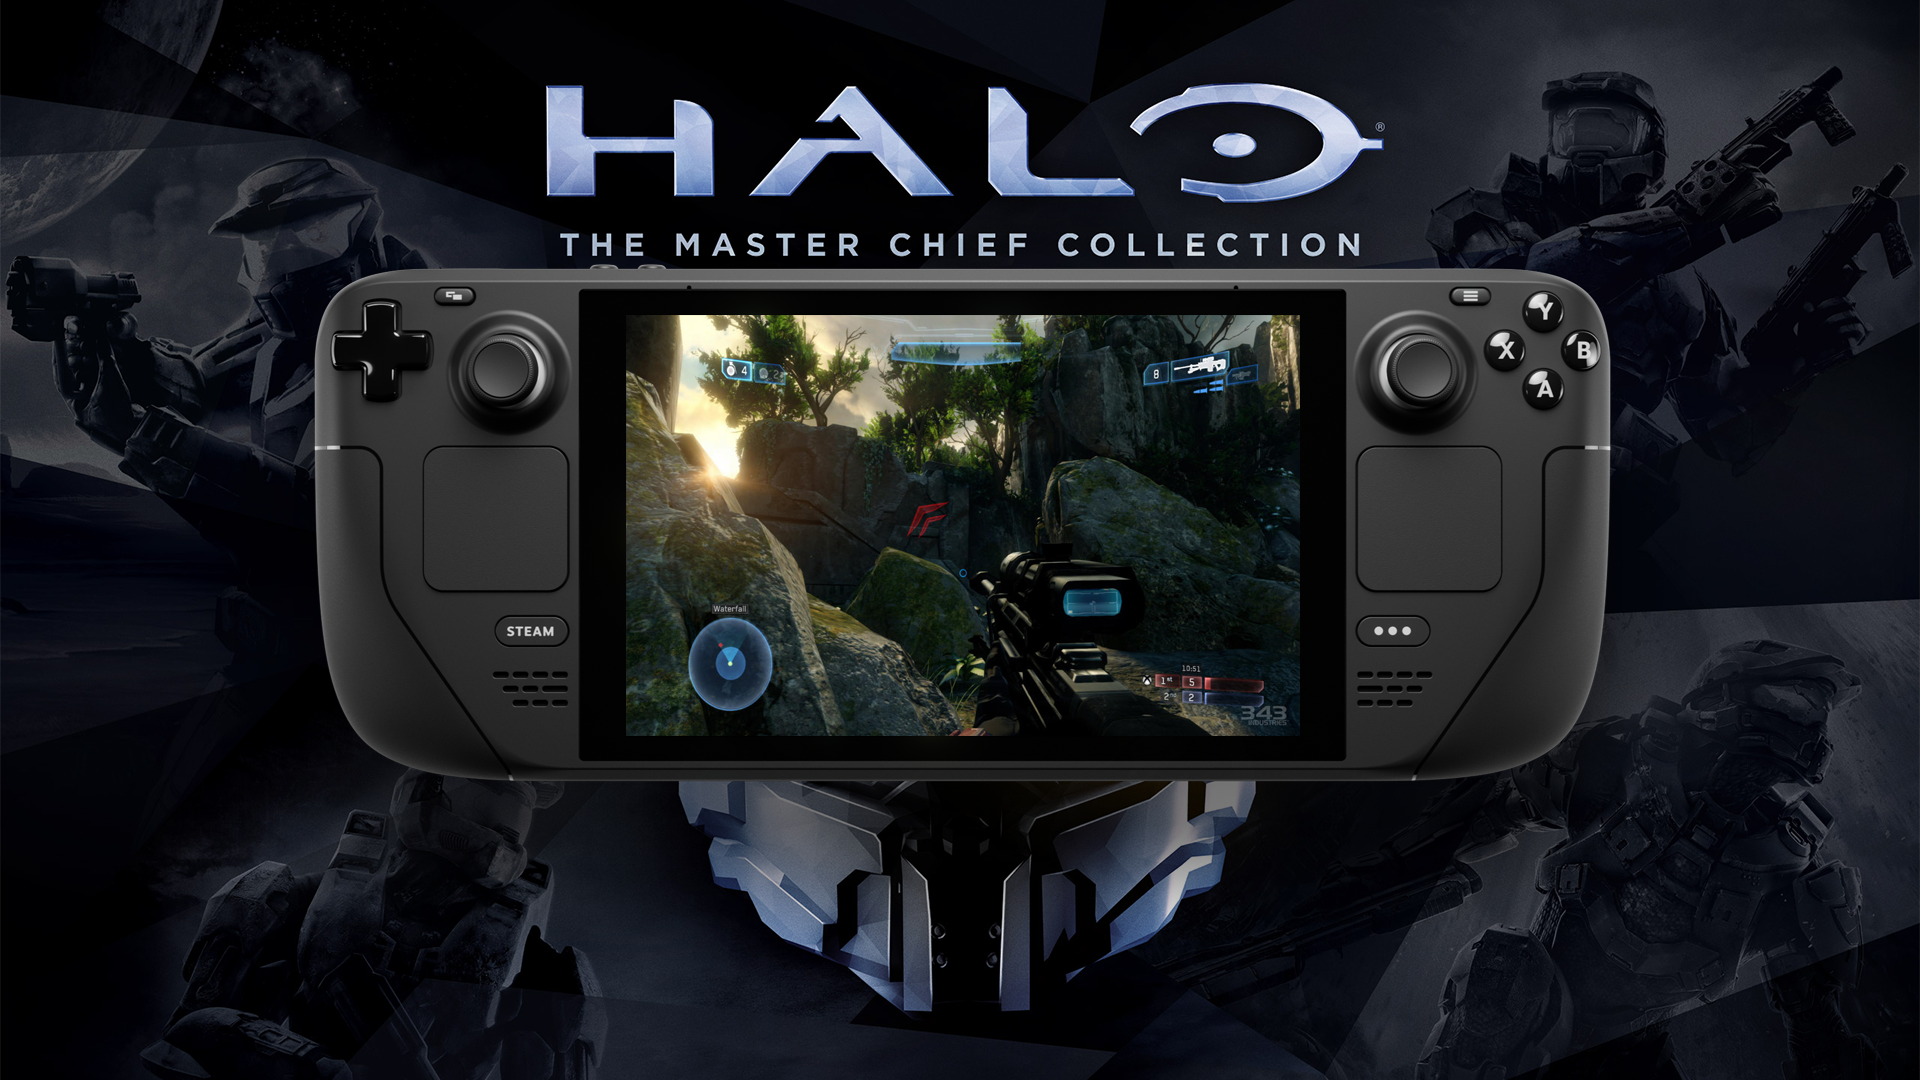 Halo: The Master Chief Collection on Steam Deck - Analysis and